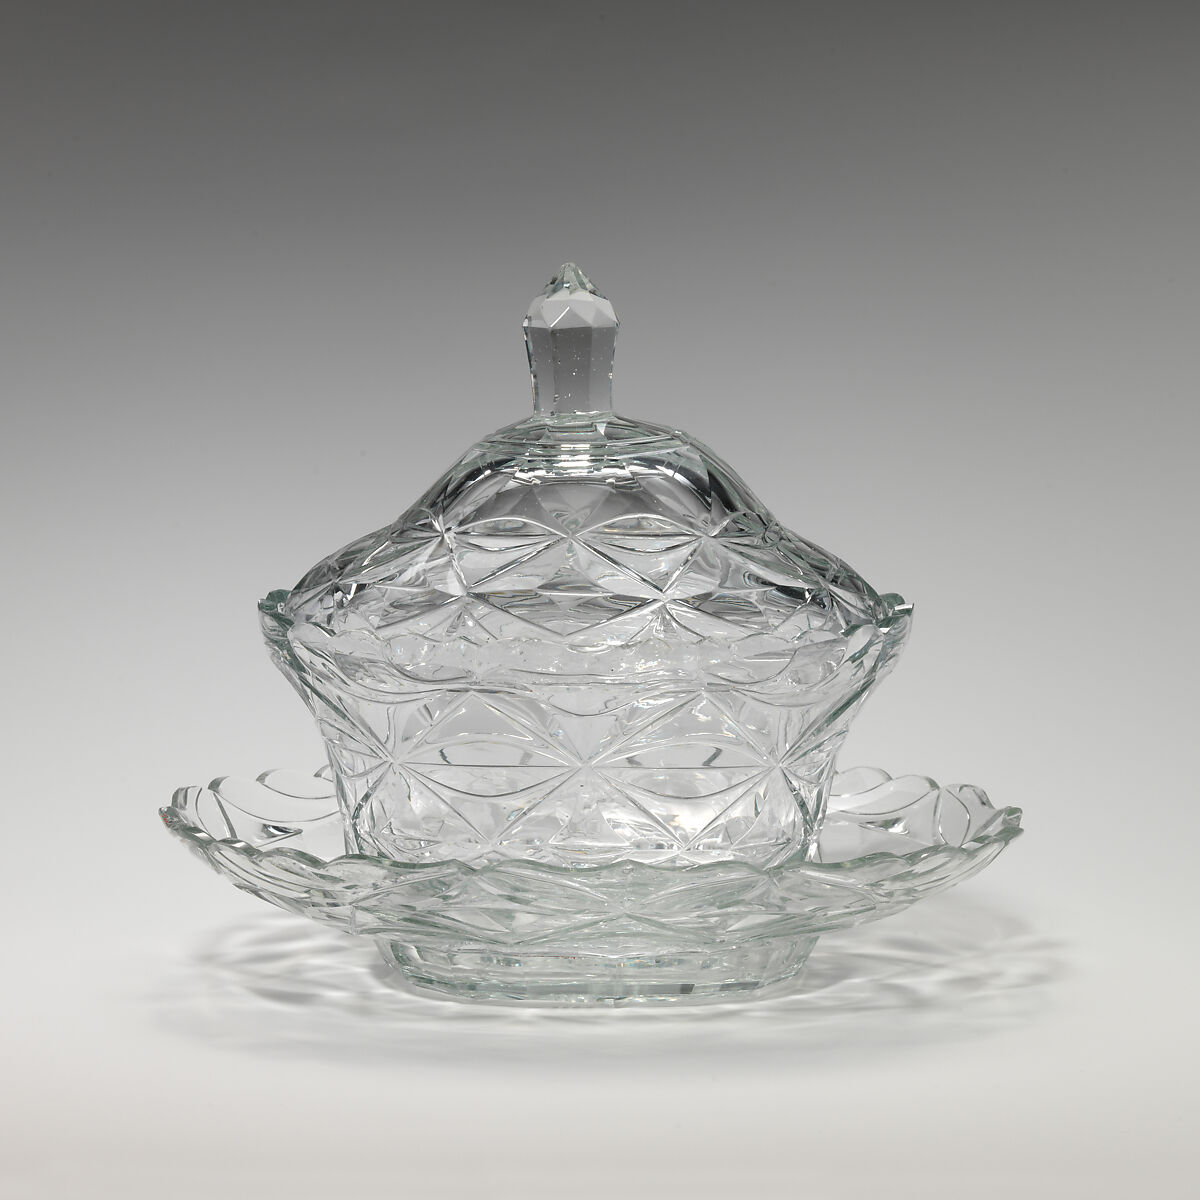 Bowl with cover and tray, Glass, British or Continental European 